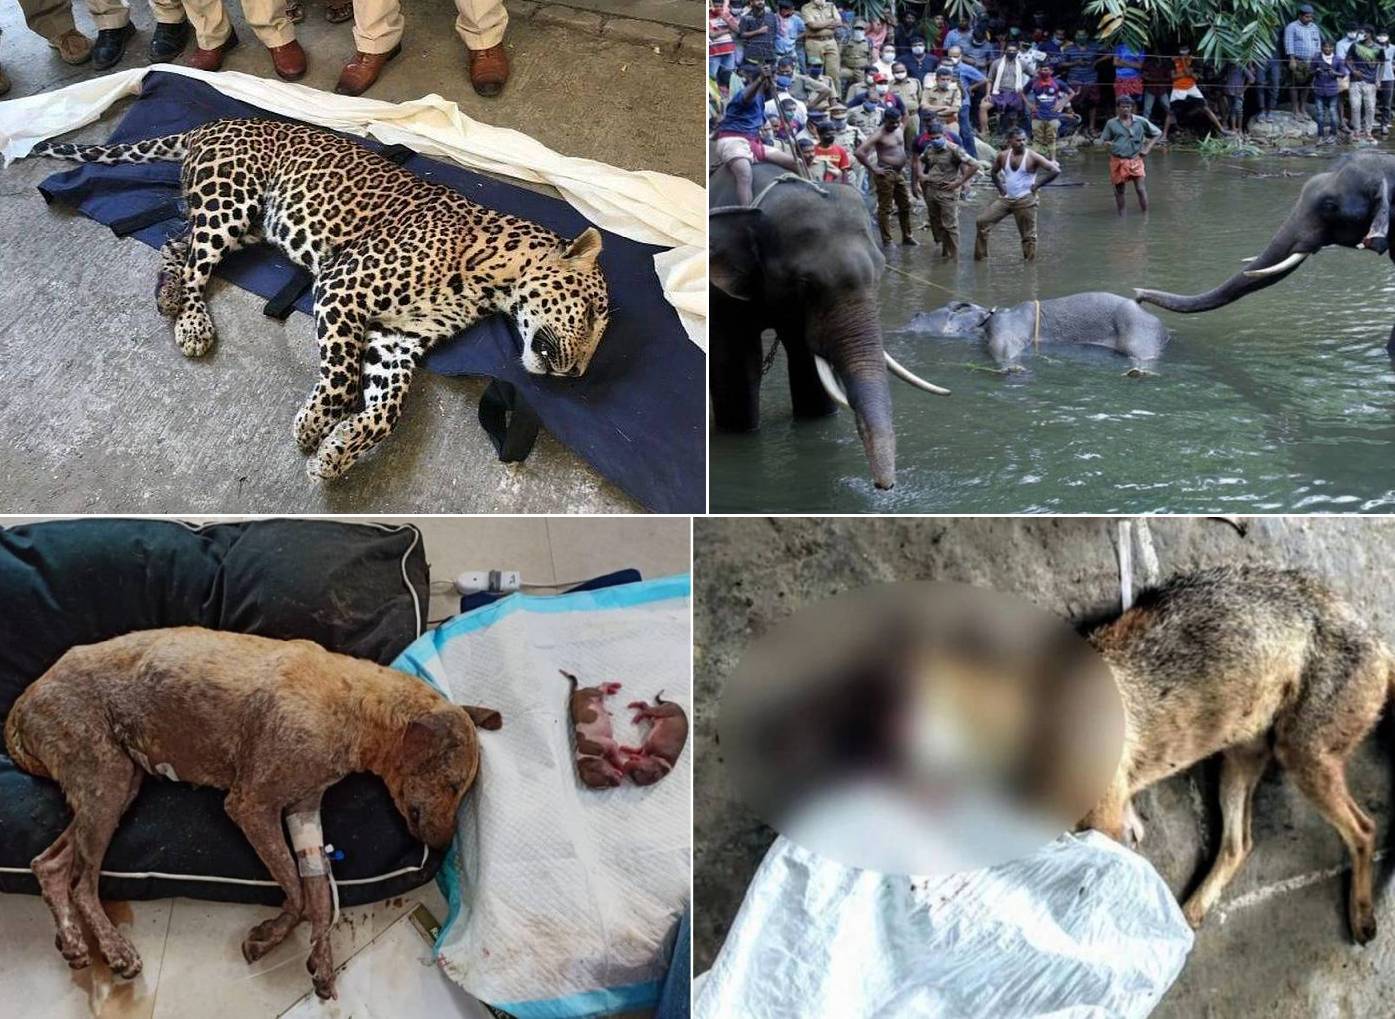 Barbaric and Inhumane Incidents of Animal Cruelty in India